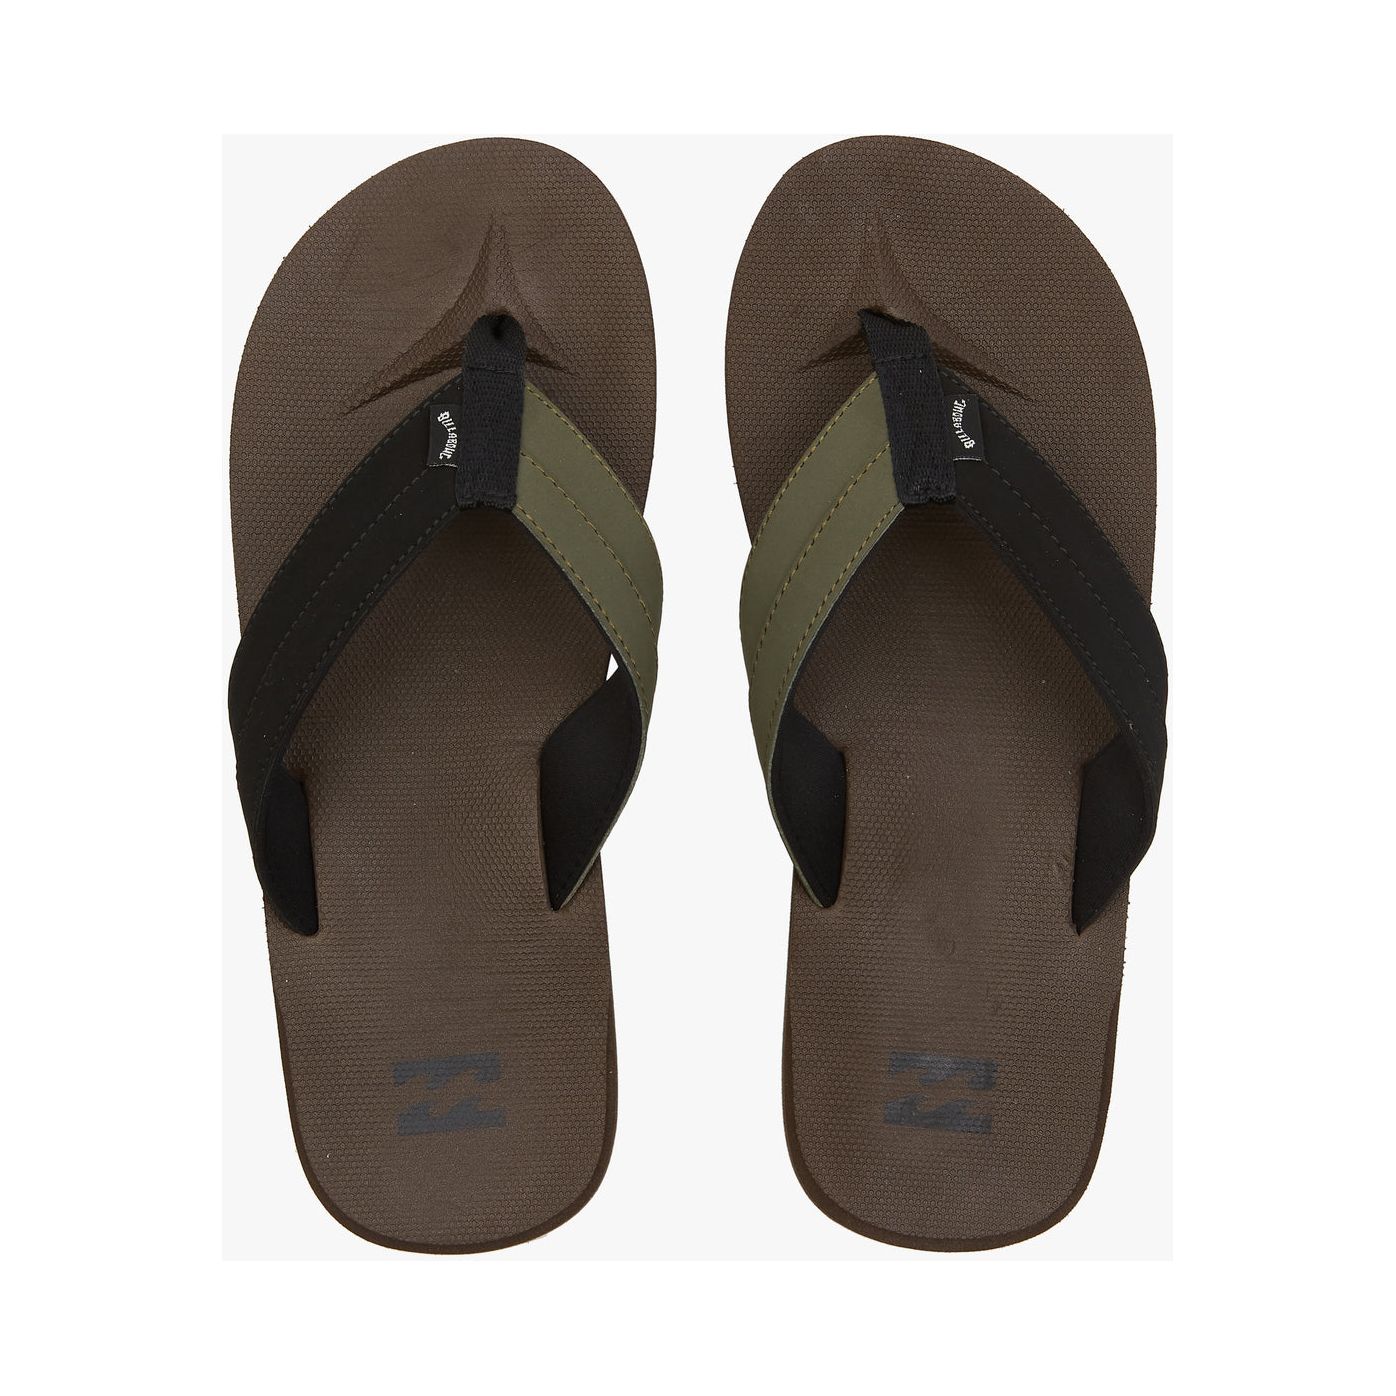 Billabong - All Day Impact Slip-On Sandals in Chocolate